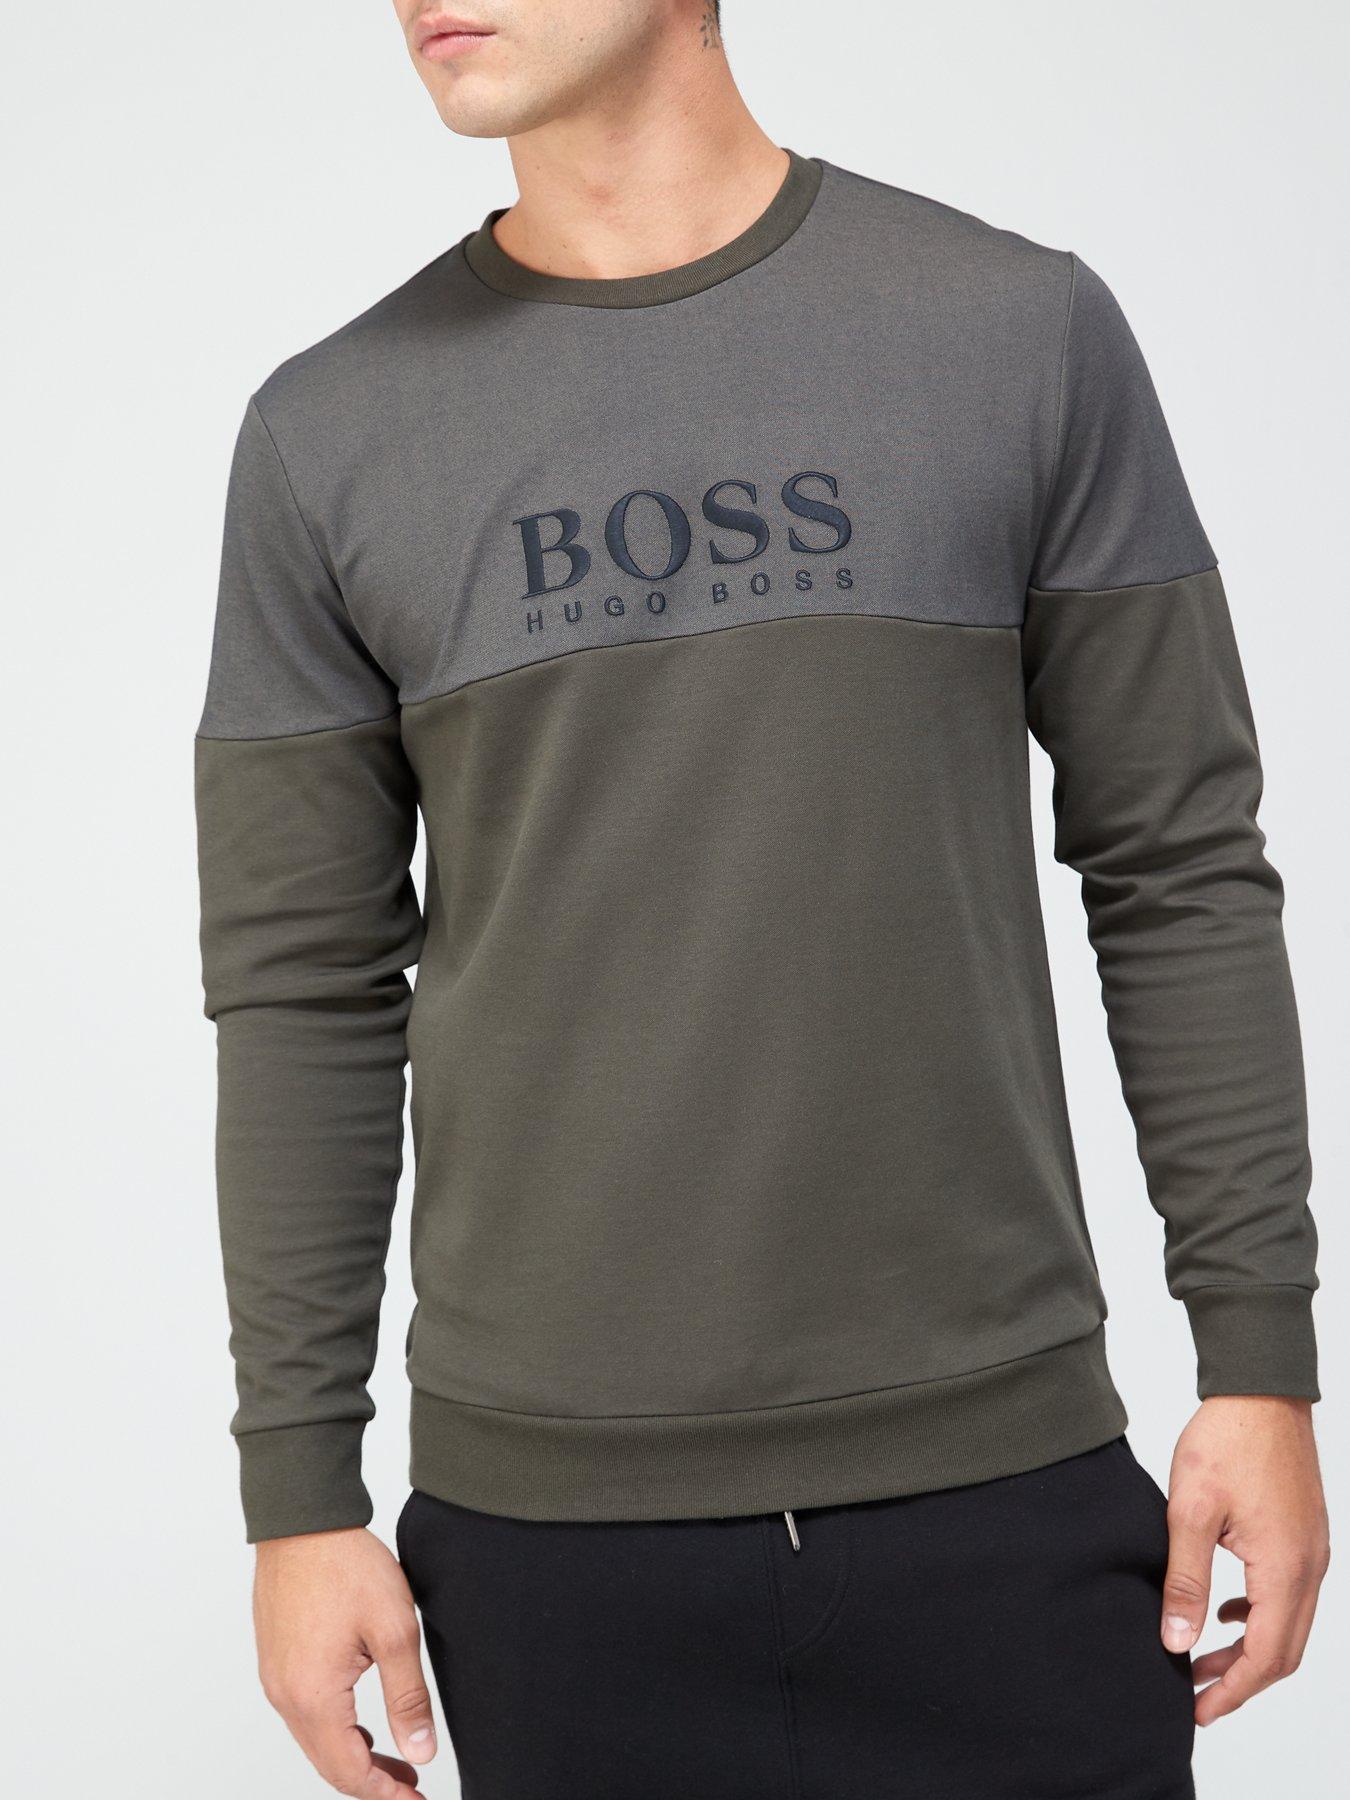 hugo boss next day delivery